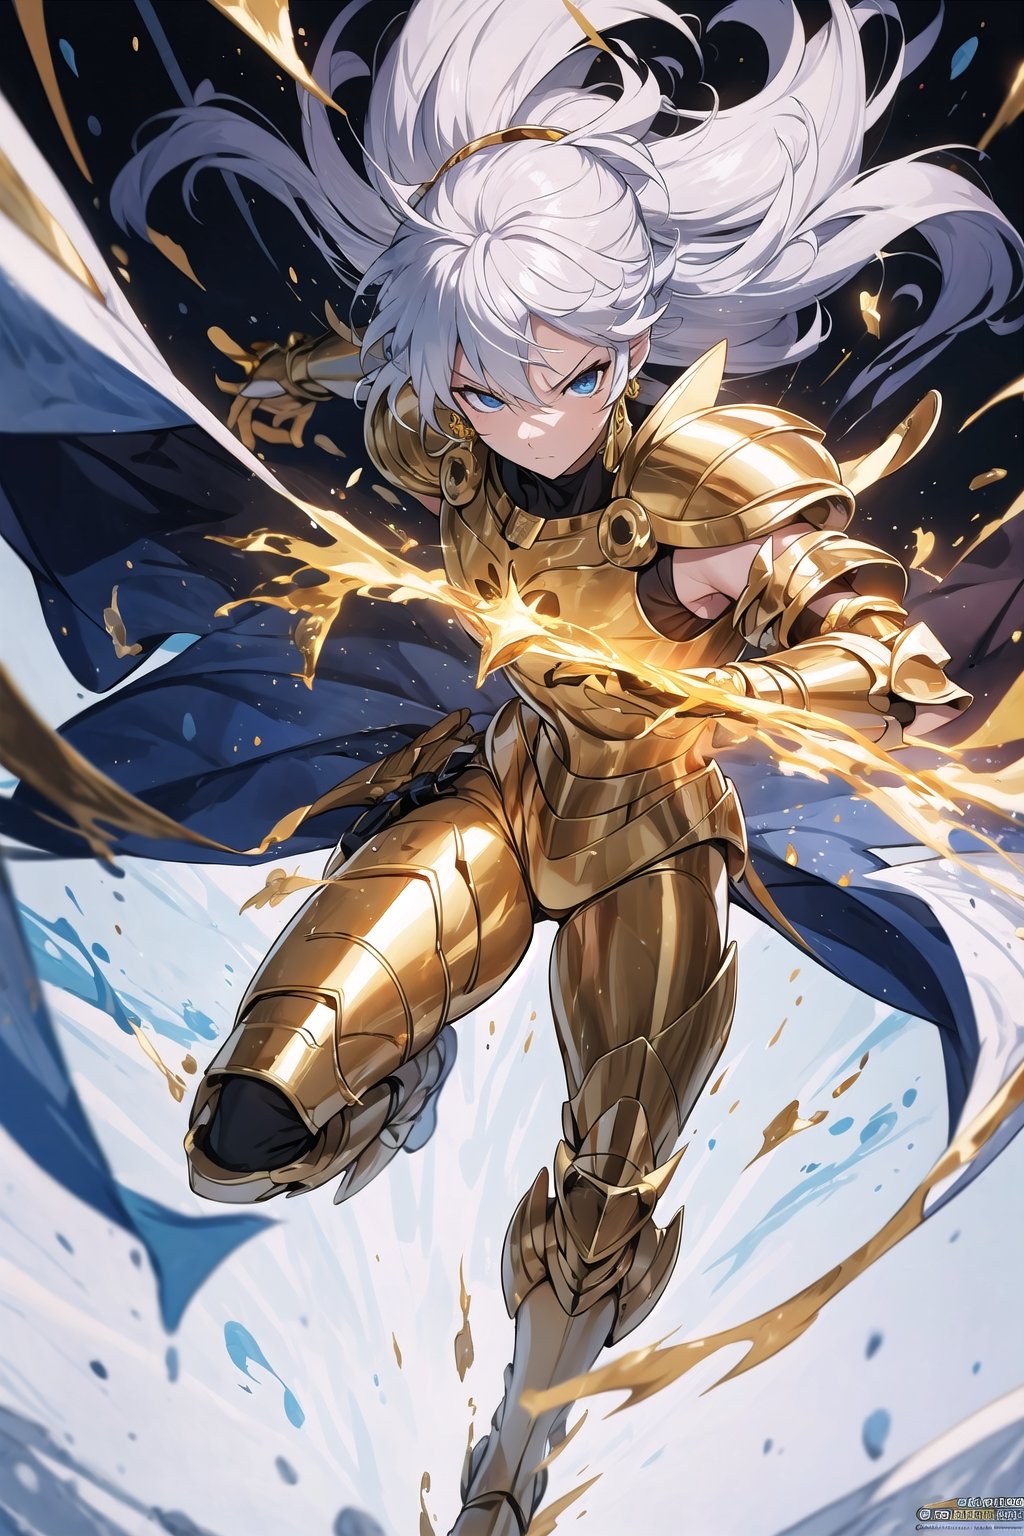 absurdres, highres, ultra detailed,Insane detail in face,  (boy:1.3), Gold Saint, Saint Seiya Style, paint splatter, expressive drips, random patterns, energetic movement, bold colors, dynamic texture, spontaneous creativity, Gold Armor, Full body armor, no helmet, Zodiac Knights, White long cape, white hair, Fighting pose,Pokemon Gotcha Style, gold gloves, long hair, floating